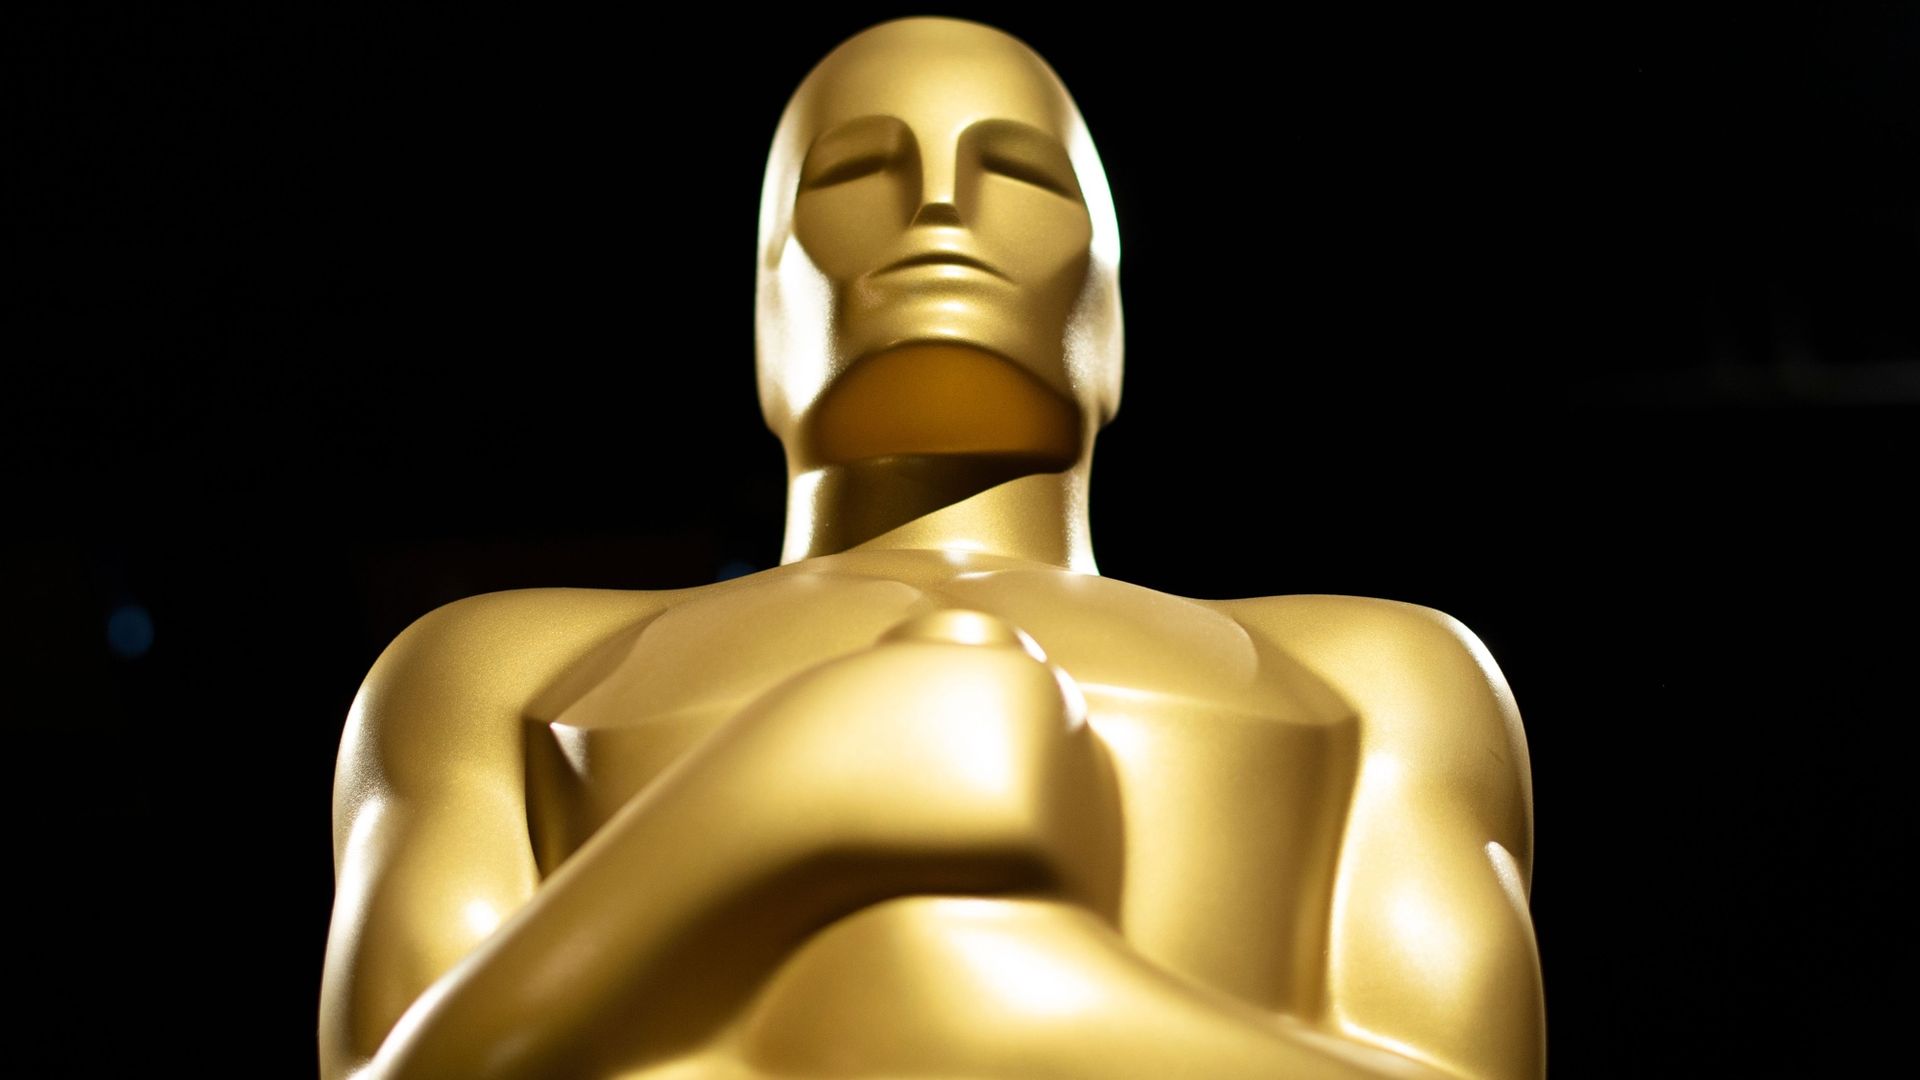 How to watch Oscars 2022 now Live stream without cable Tom's Guide